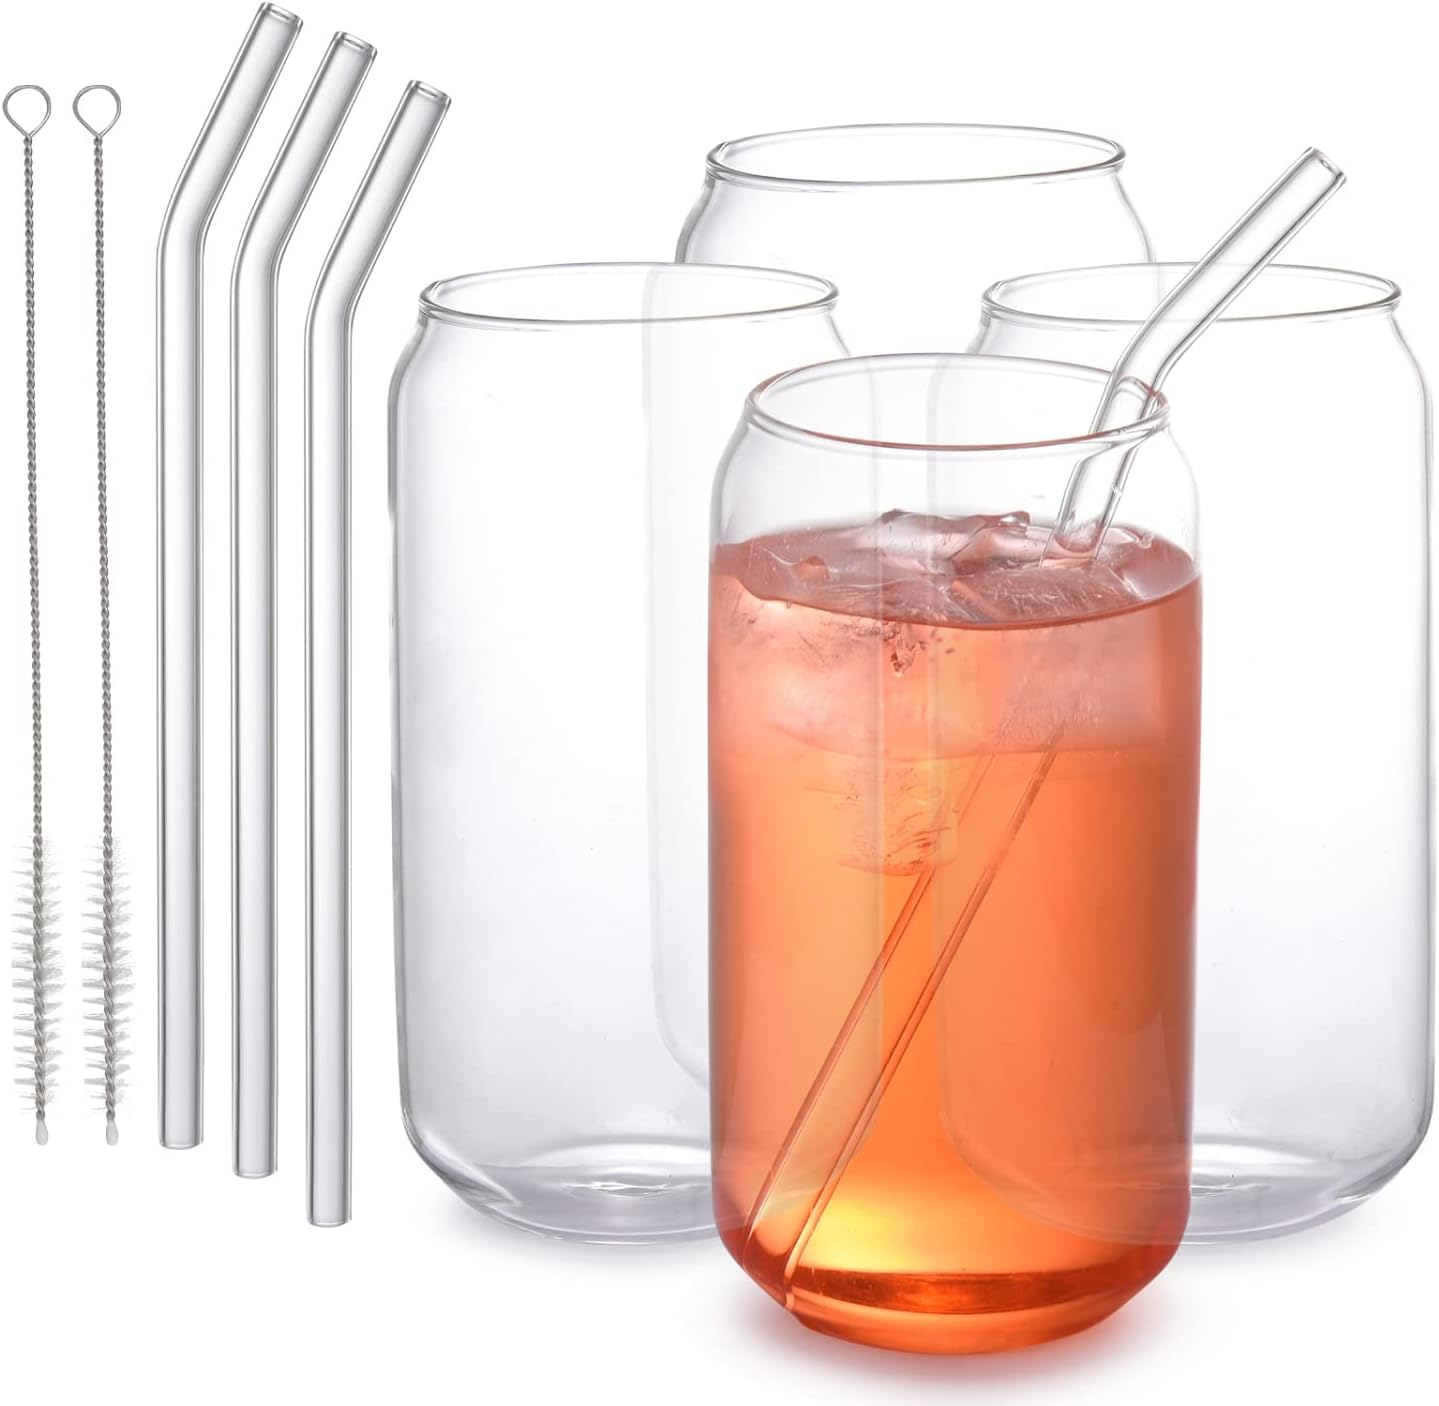 WHOLE HOUSEWARES Drinking Glasses with Glass Straw - Tumbler Glasses for Iced Coffee Glasses - Smoothie Iced Tea and Cocktail Glass Cups for Wine, Soda, Clear Water or Beer